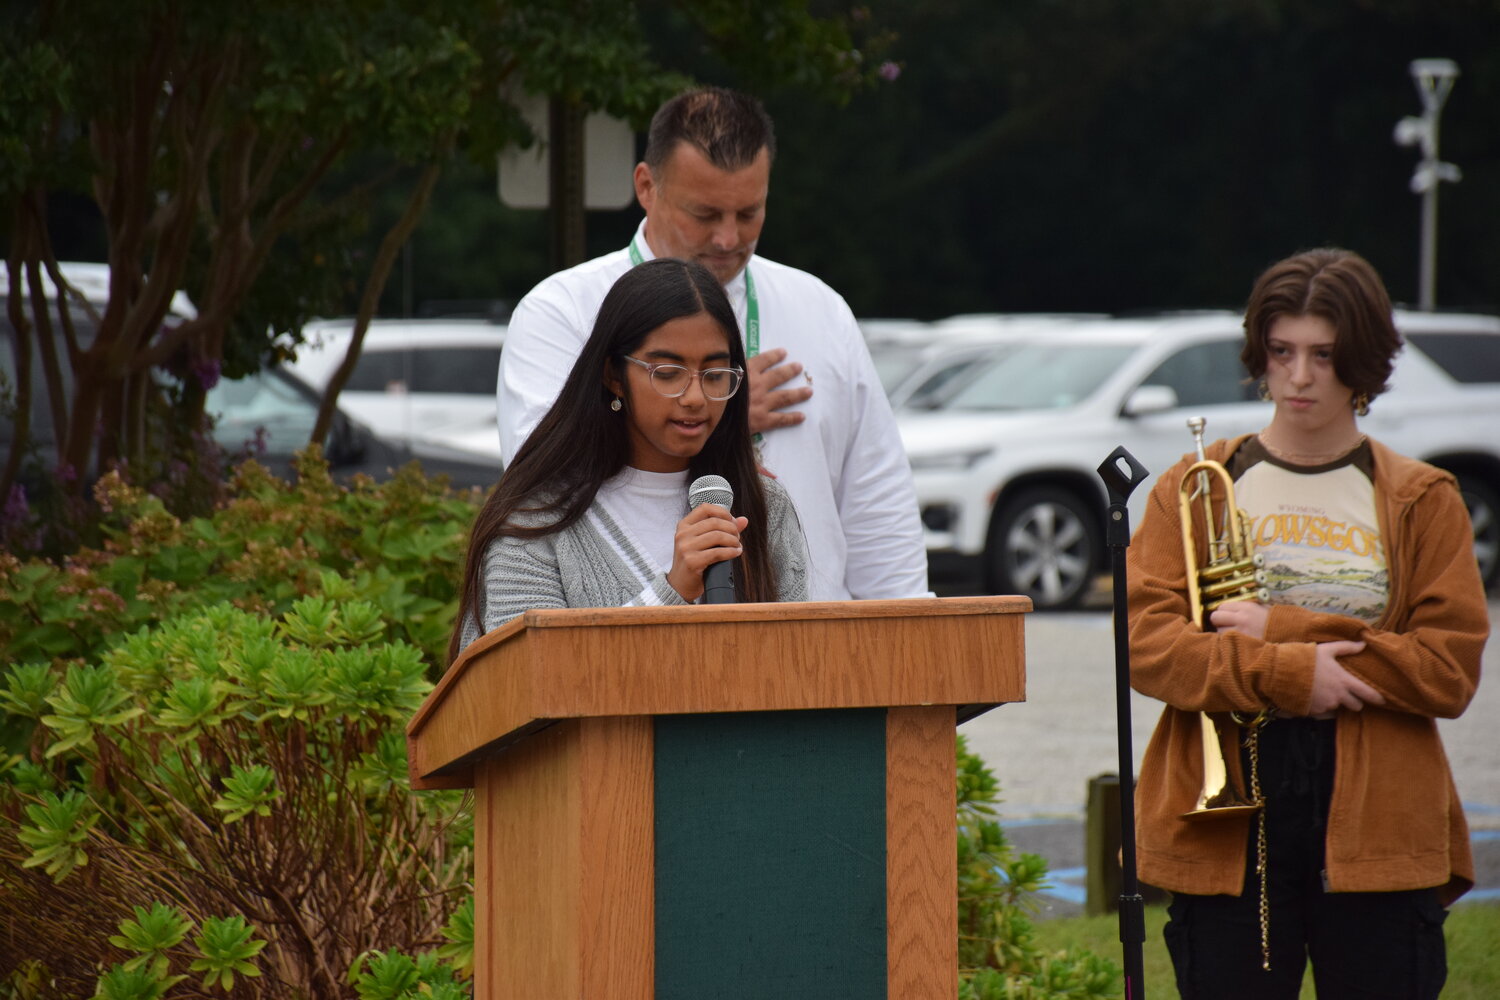 LVHS student Sarah Paulus sang the ‘Star Spangled Banner’ during the Sept. 11 ceremony.